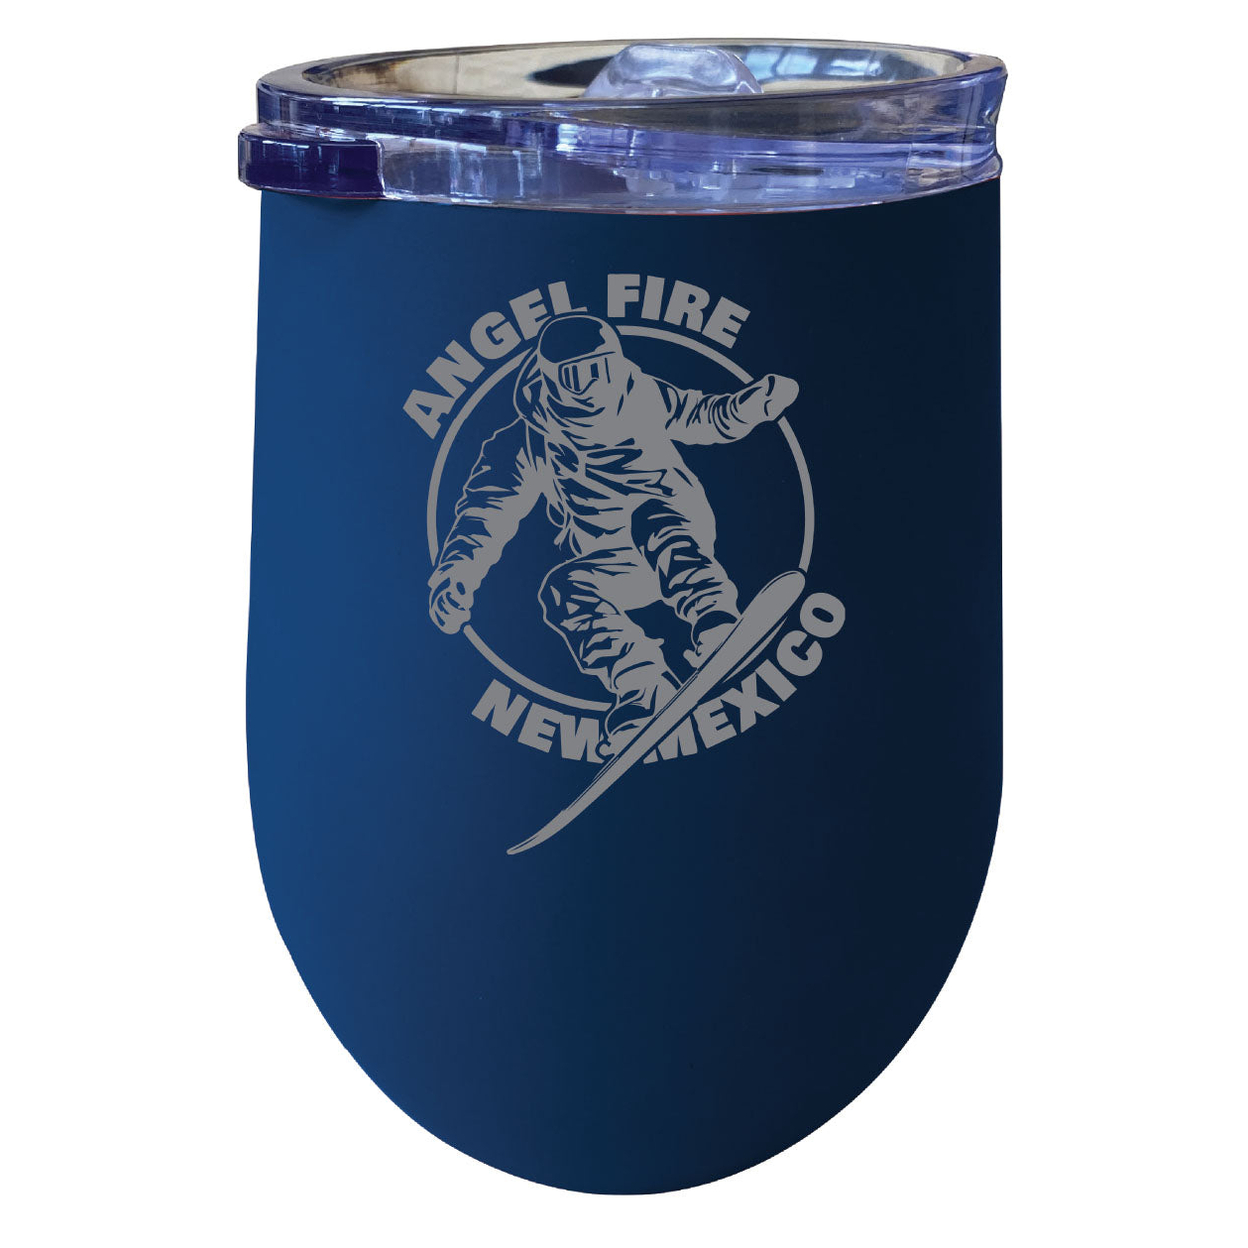 Angel Fire New Mexico Souvenir 12 Oz Engraved Insulated Wine Stainless Steel Tumbler - Navy,,4-Pack